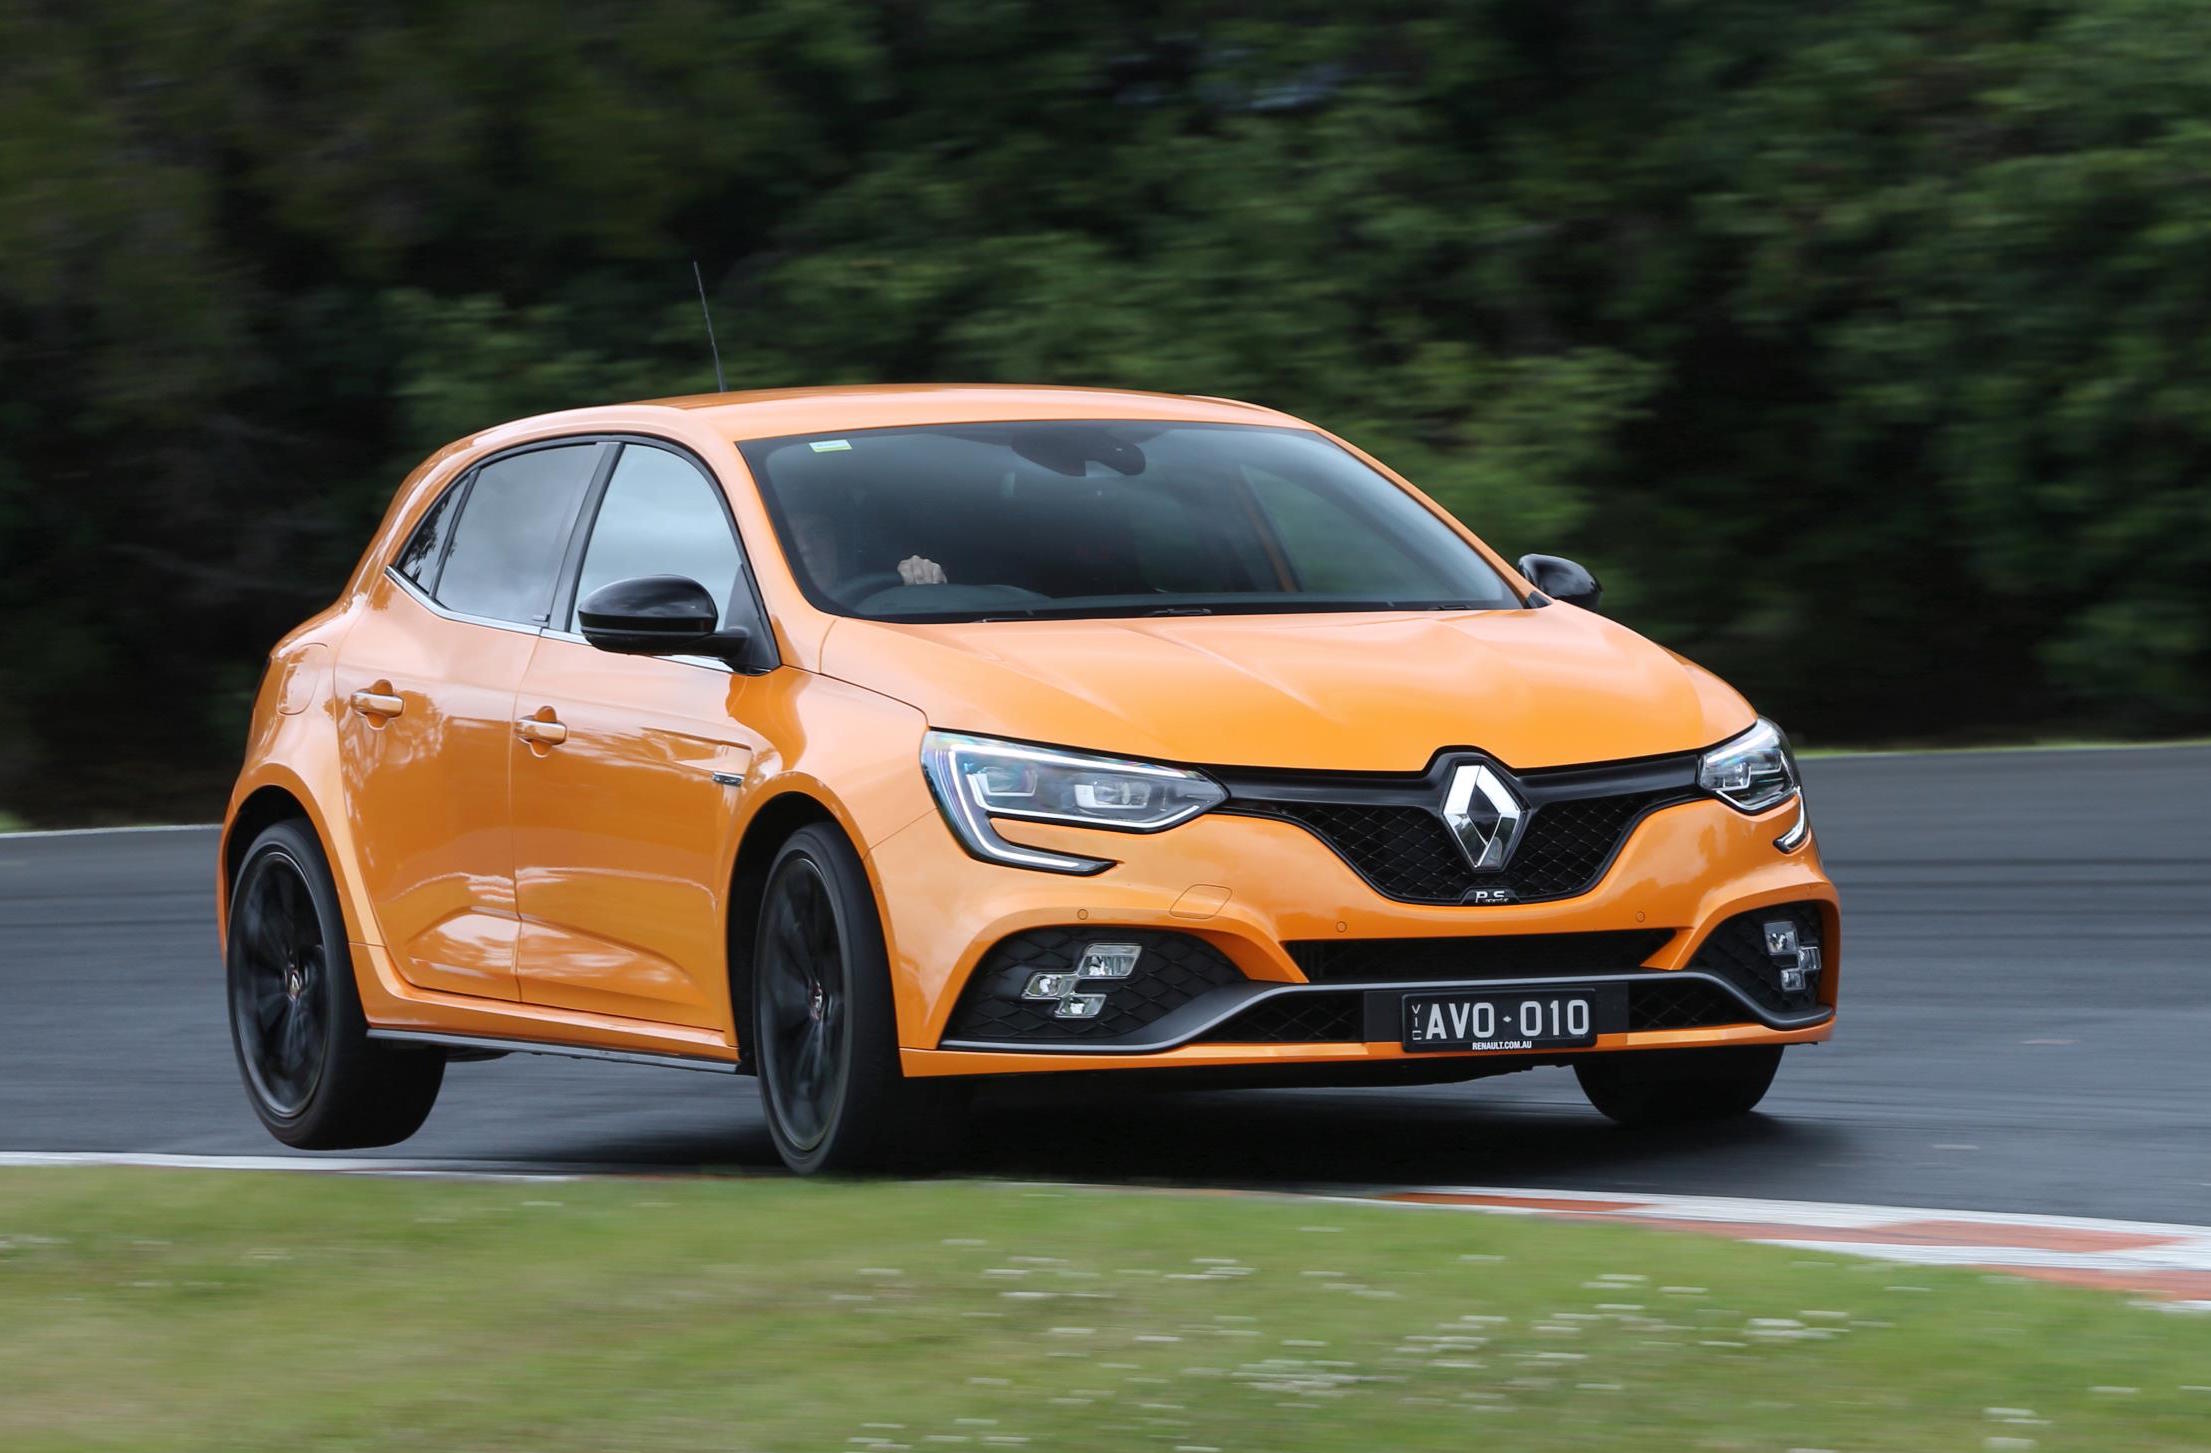 2018 Renault Megane RS launches in Australia